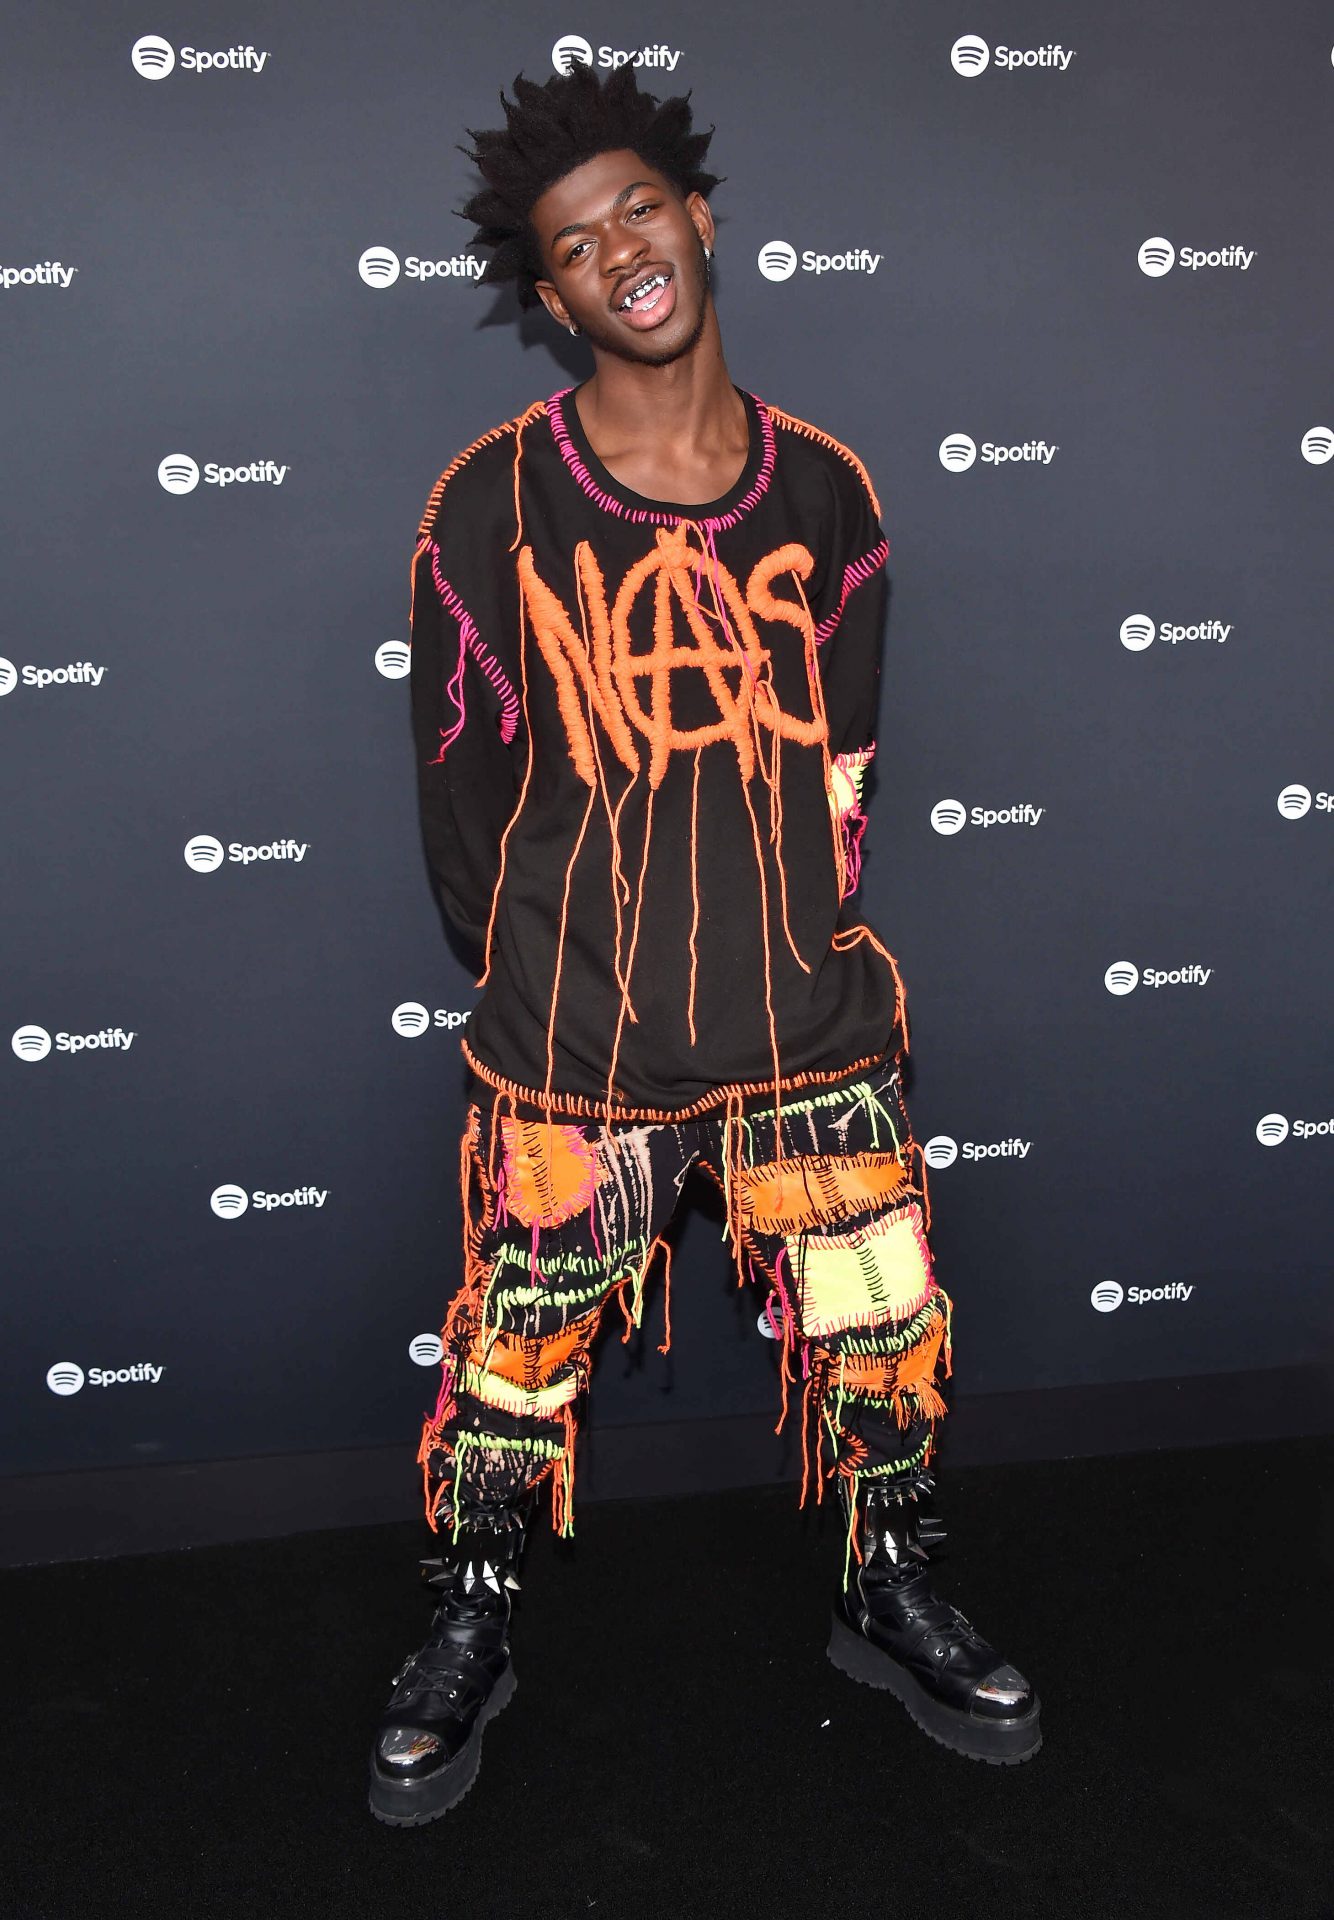 Nike Sues Lil Nas X For Trademark Infringement Over “Satan Shoes”